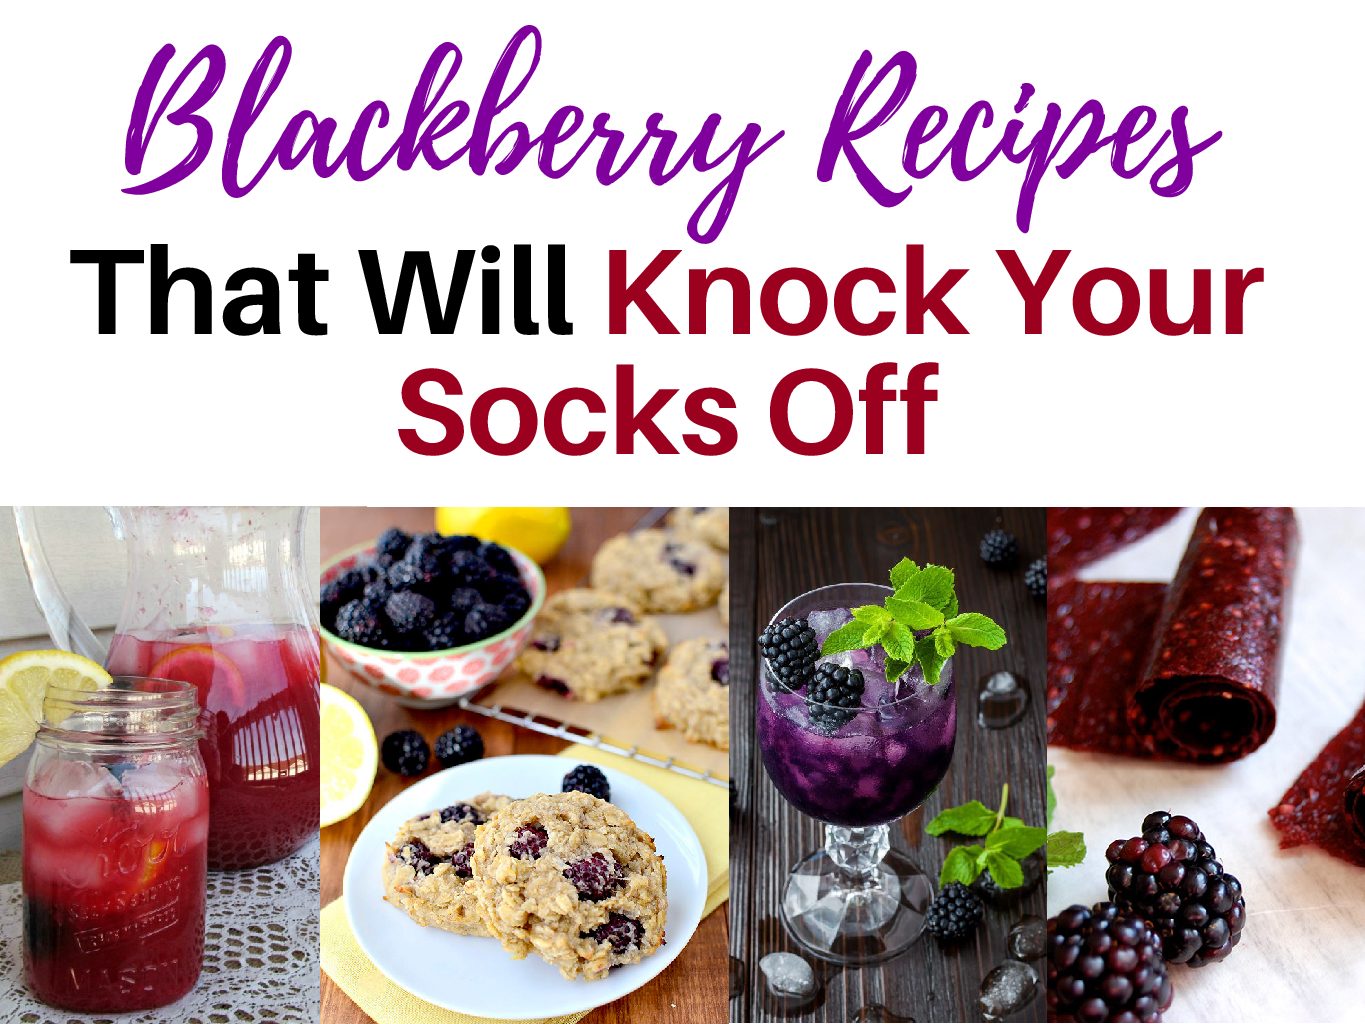 Blackberry Recipes That Will Knock Your Socks Off